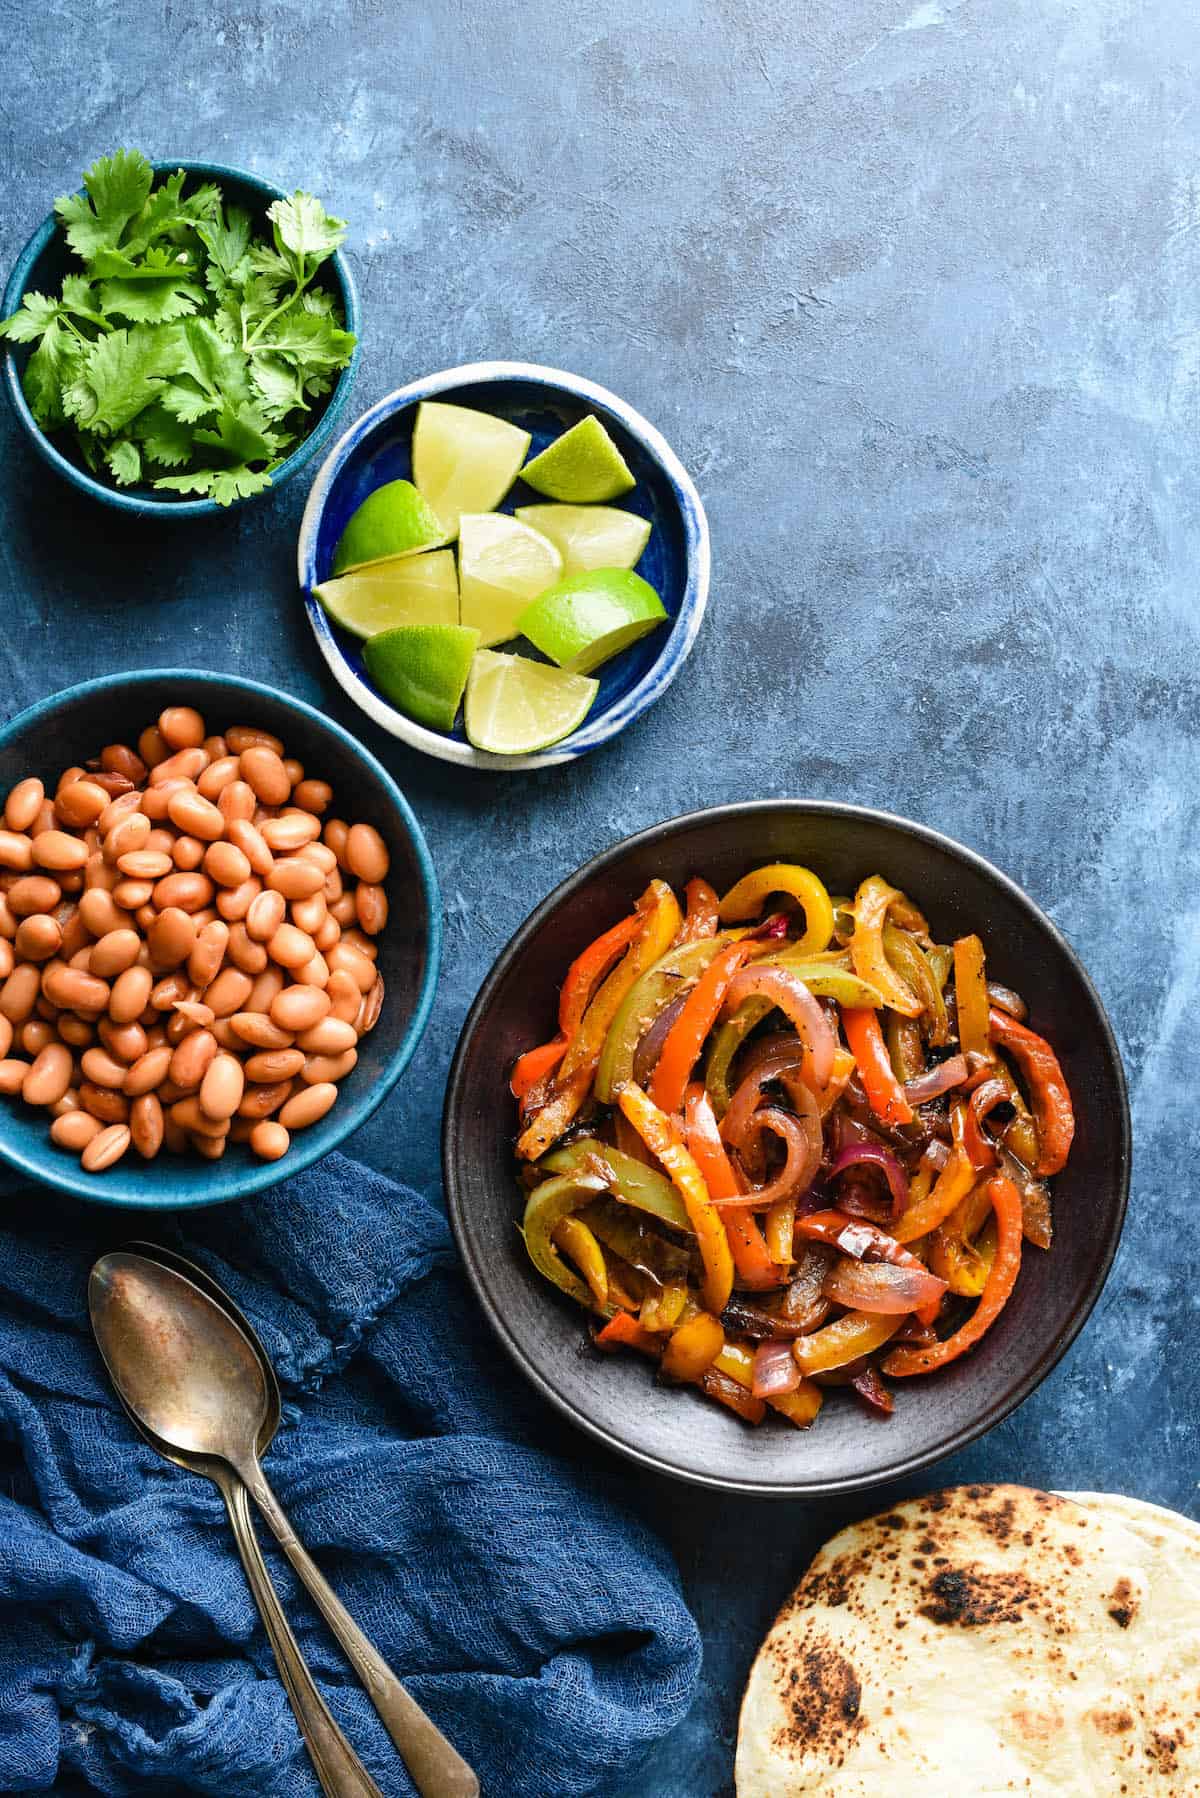 Bowls of sauteed fajita veggies, pinto beans, lime wedges and cilantro on blue background with charred tortillas.